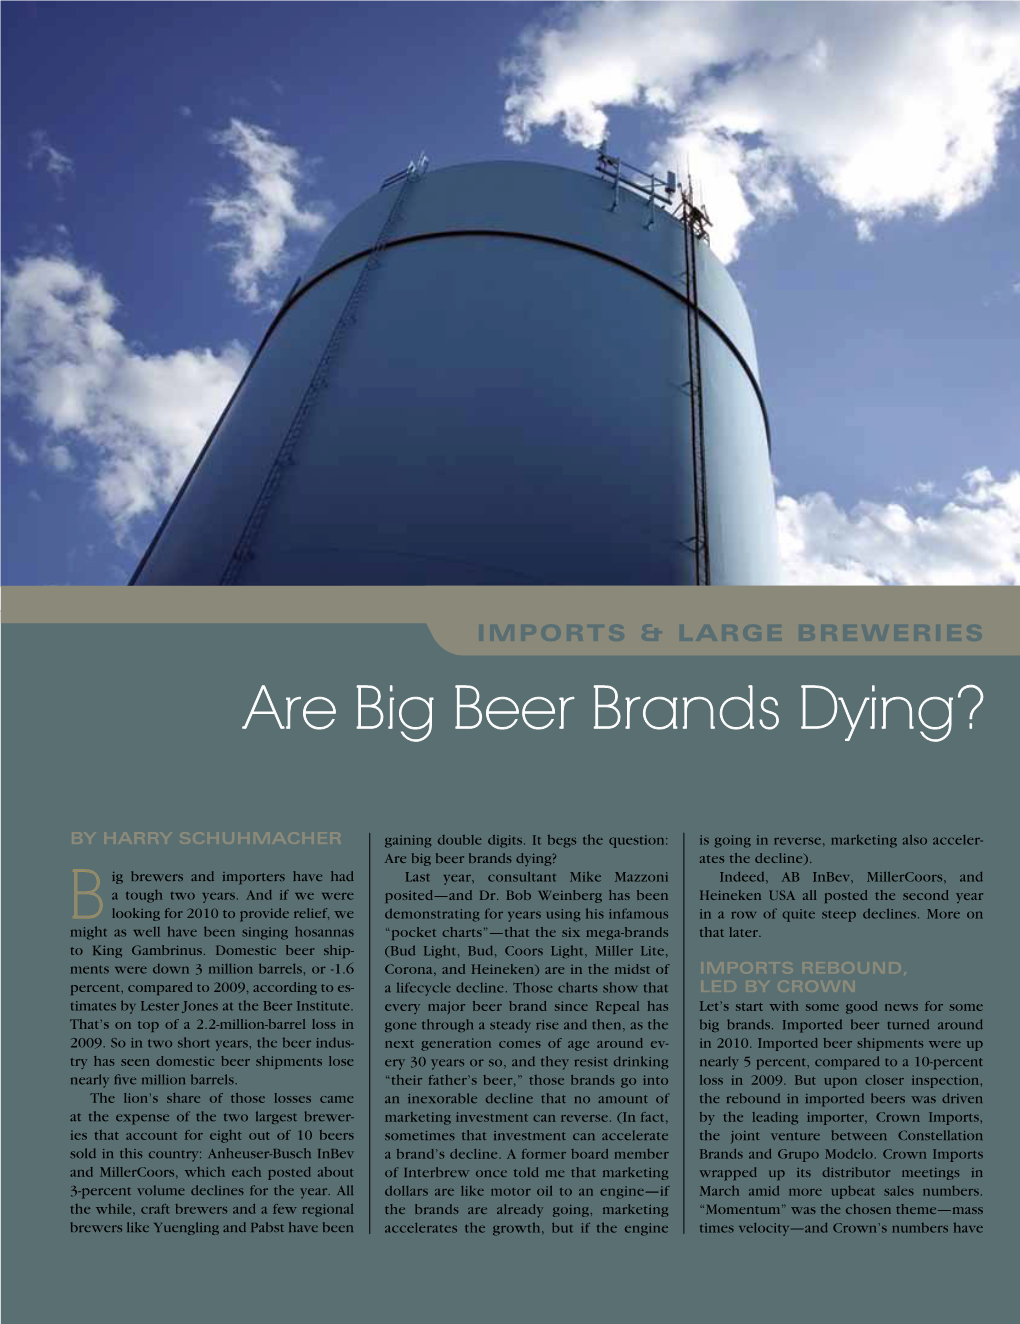 Are Big Beer Brands Dying?